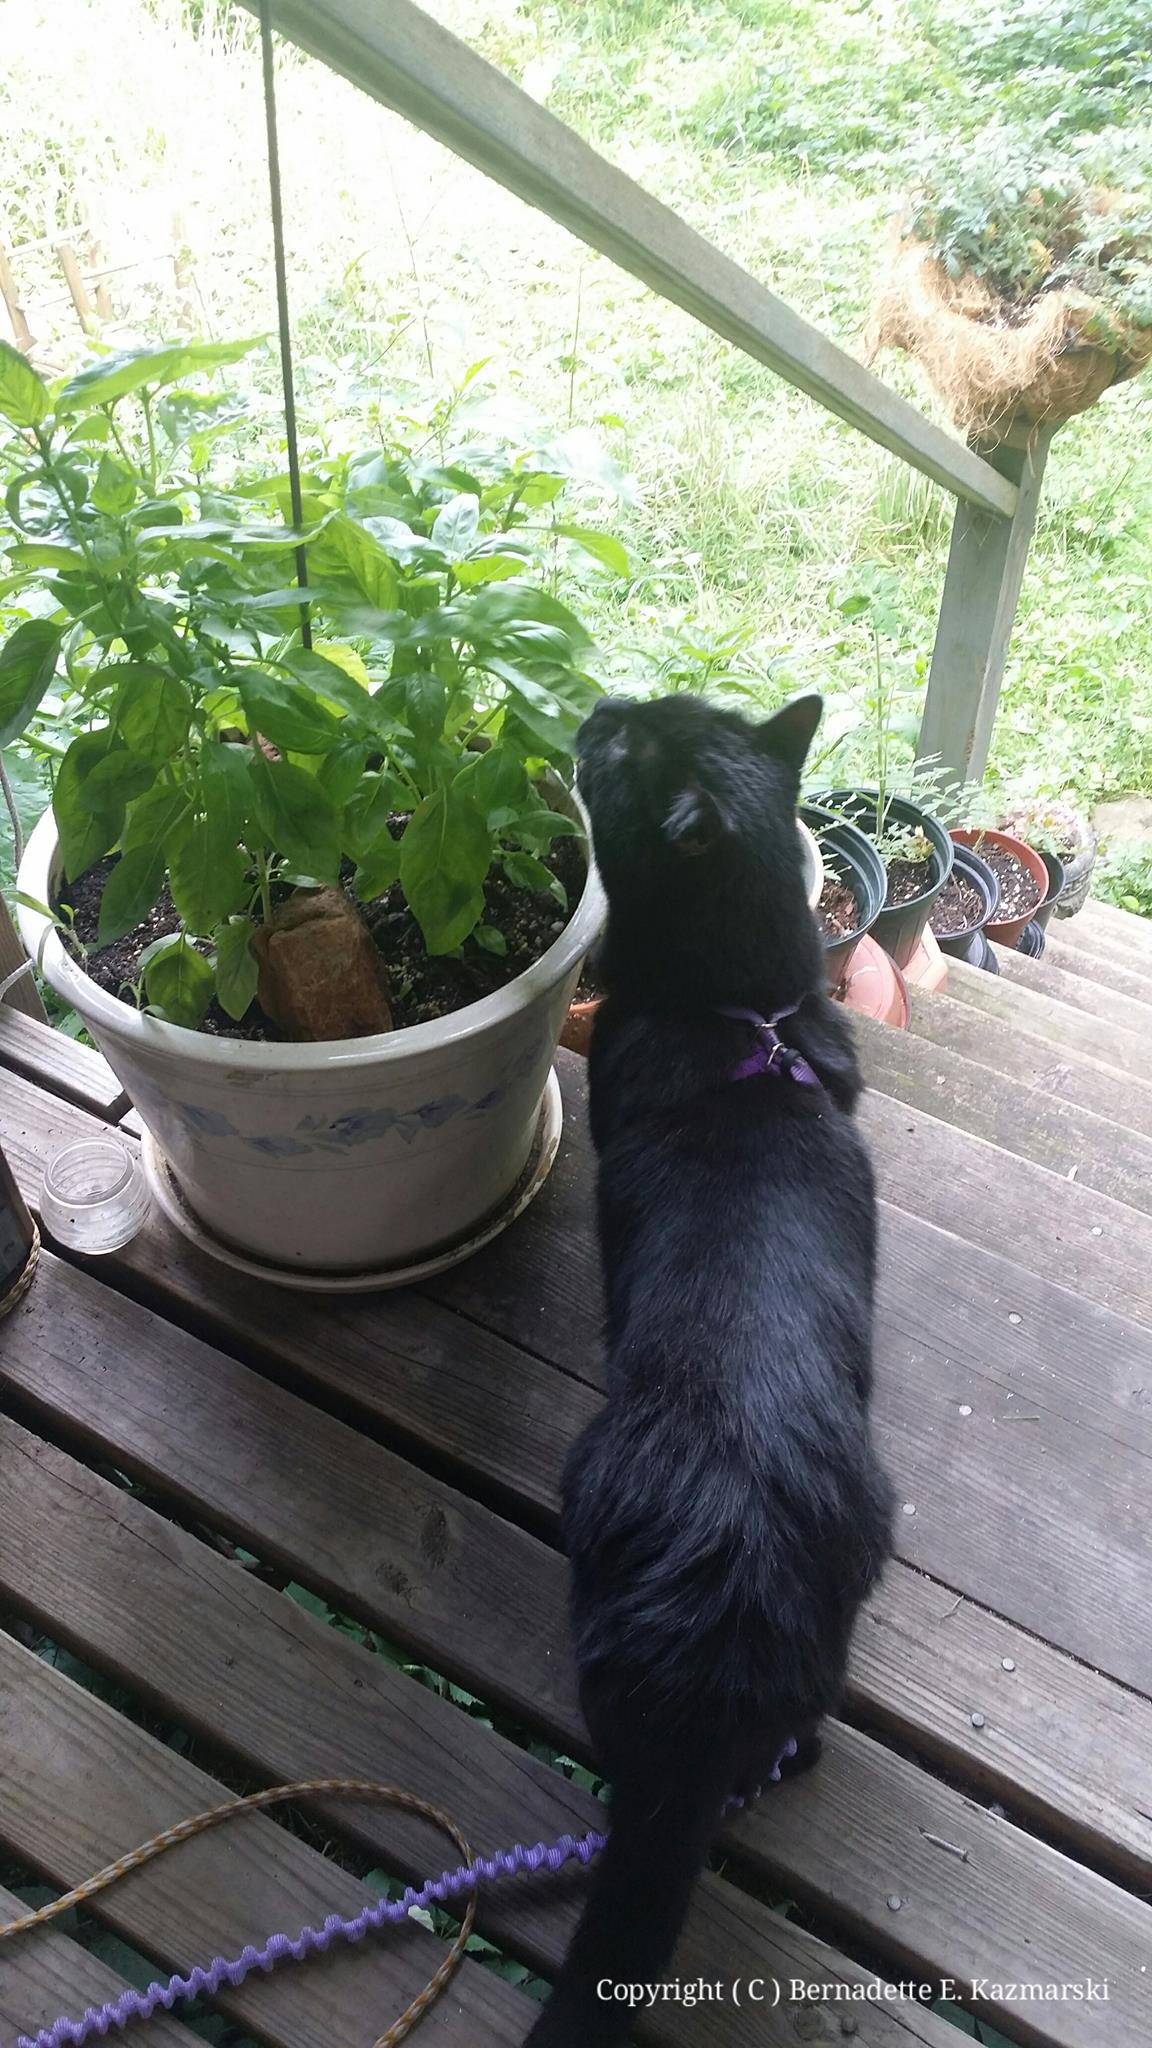 Mewsette has joined us this afternoon and of all things has found the parsley and basil--she already ate all the plants I used to have in the house.